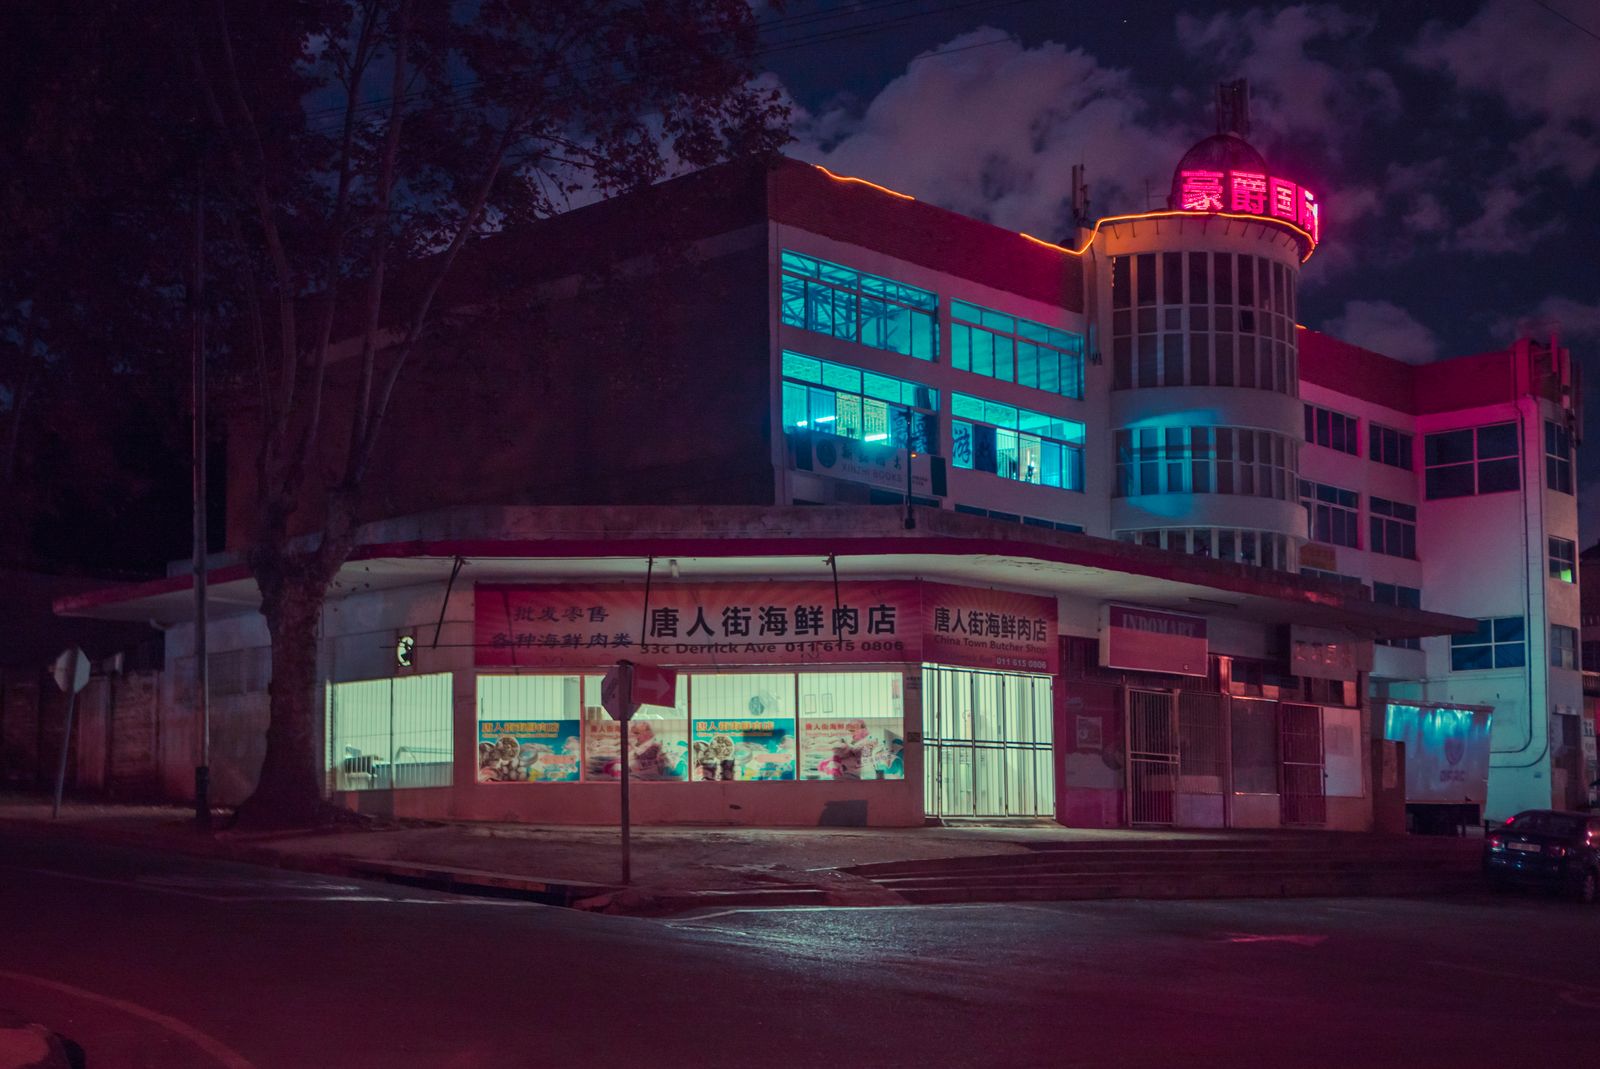 © Elsa Bleda - Image from the Chinatowns in Africa photography project